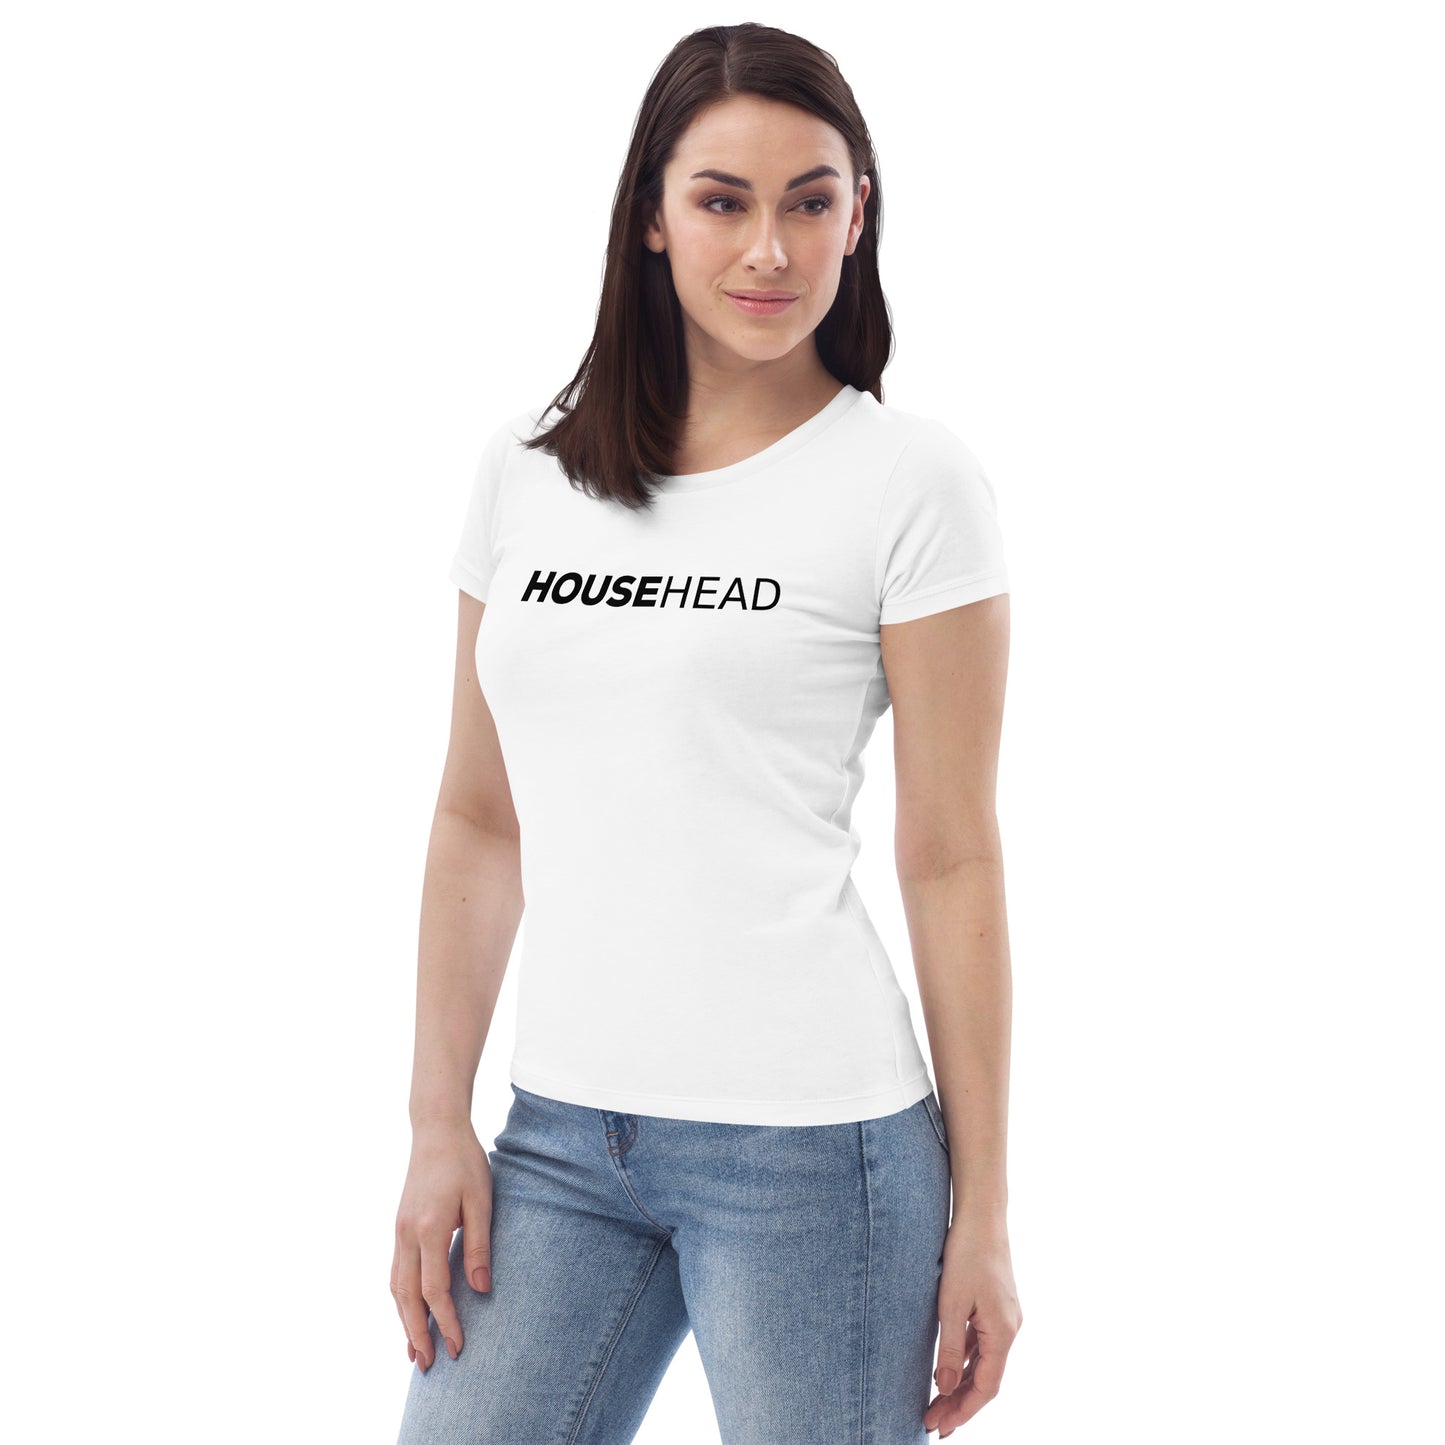 Househead - Women's Fitted T-Shirt